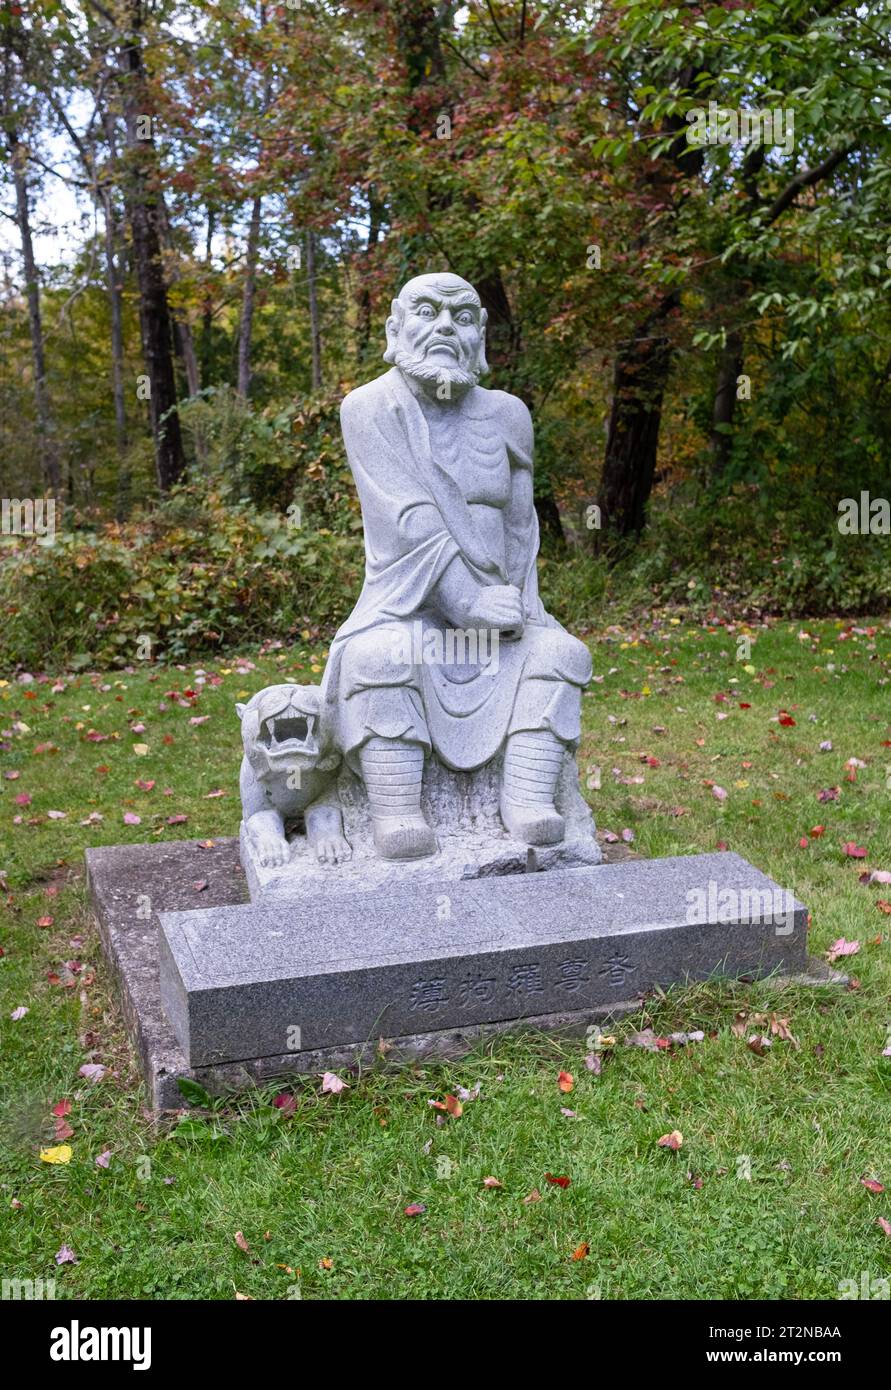 A statue of Kaludaya Thera, a contemporary of Buddha. On the path to the Chuang Yen Buddhist Monastery in Carmel, Putnam County, New York. Stock Photo